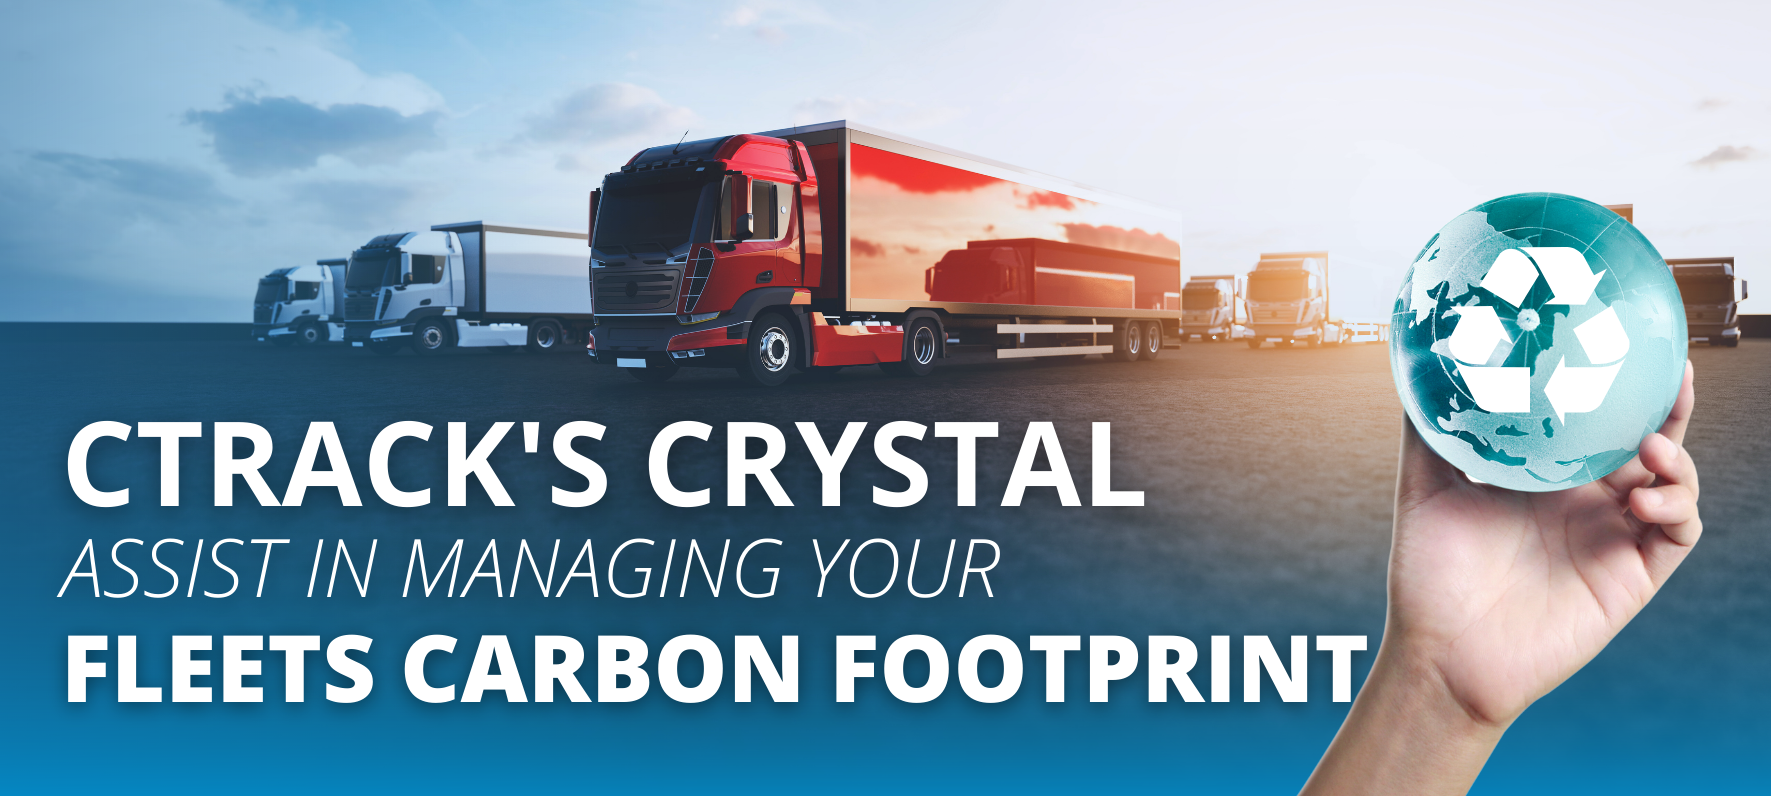 Ctrack’s Crystal assist in managing your fleets carbon footprint